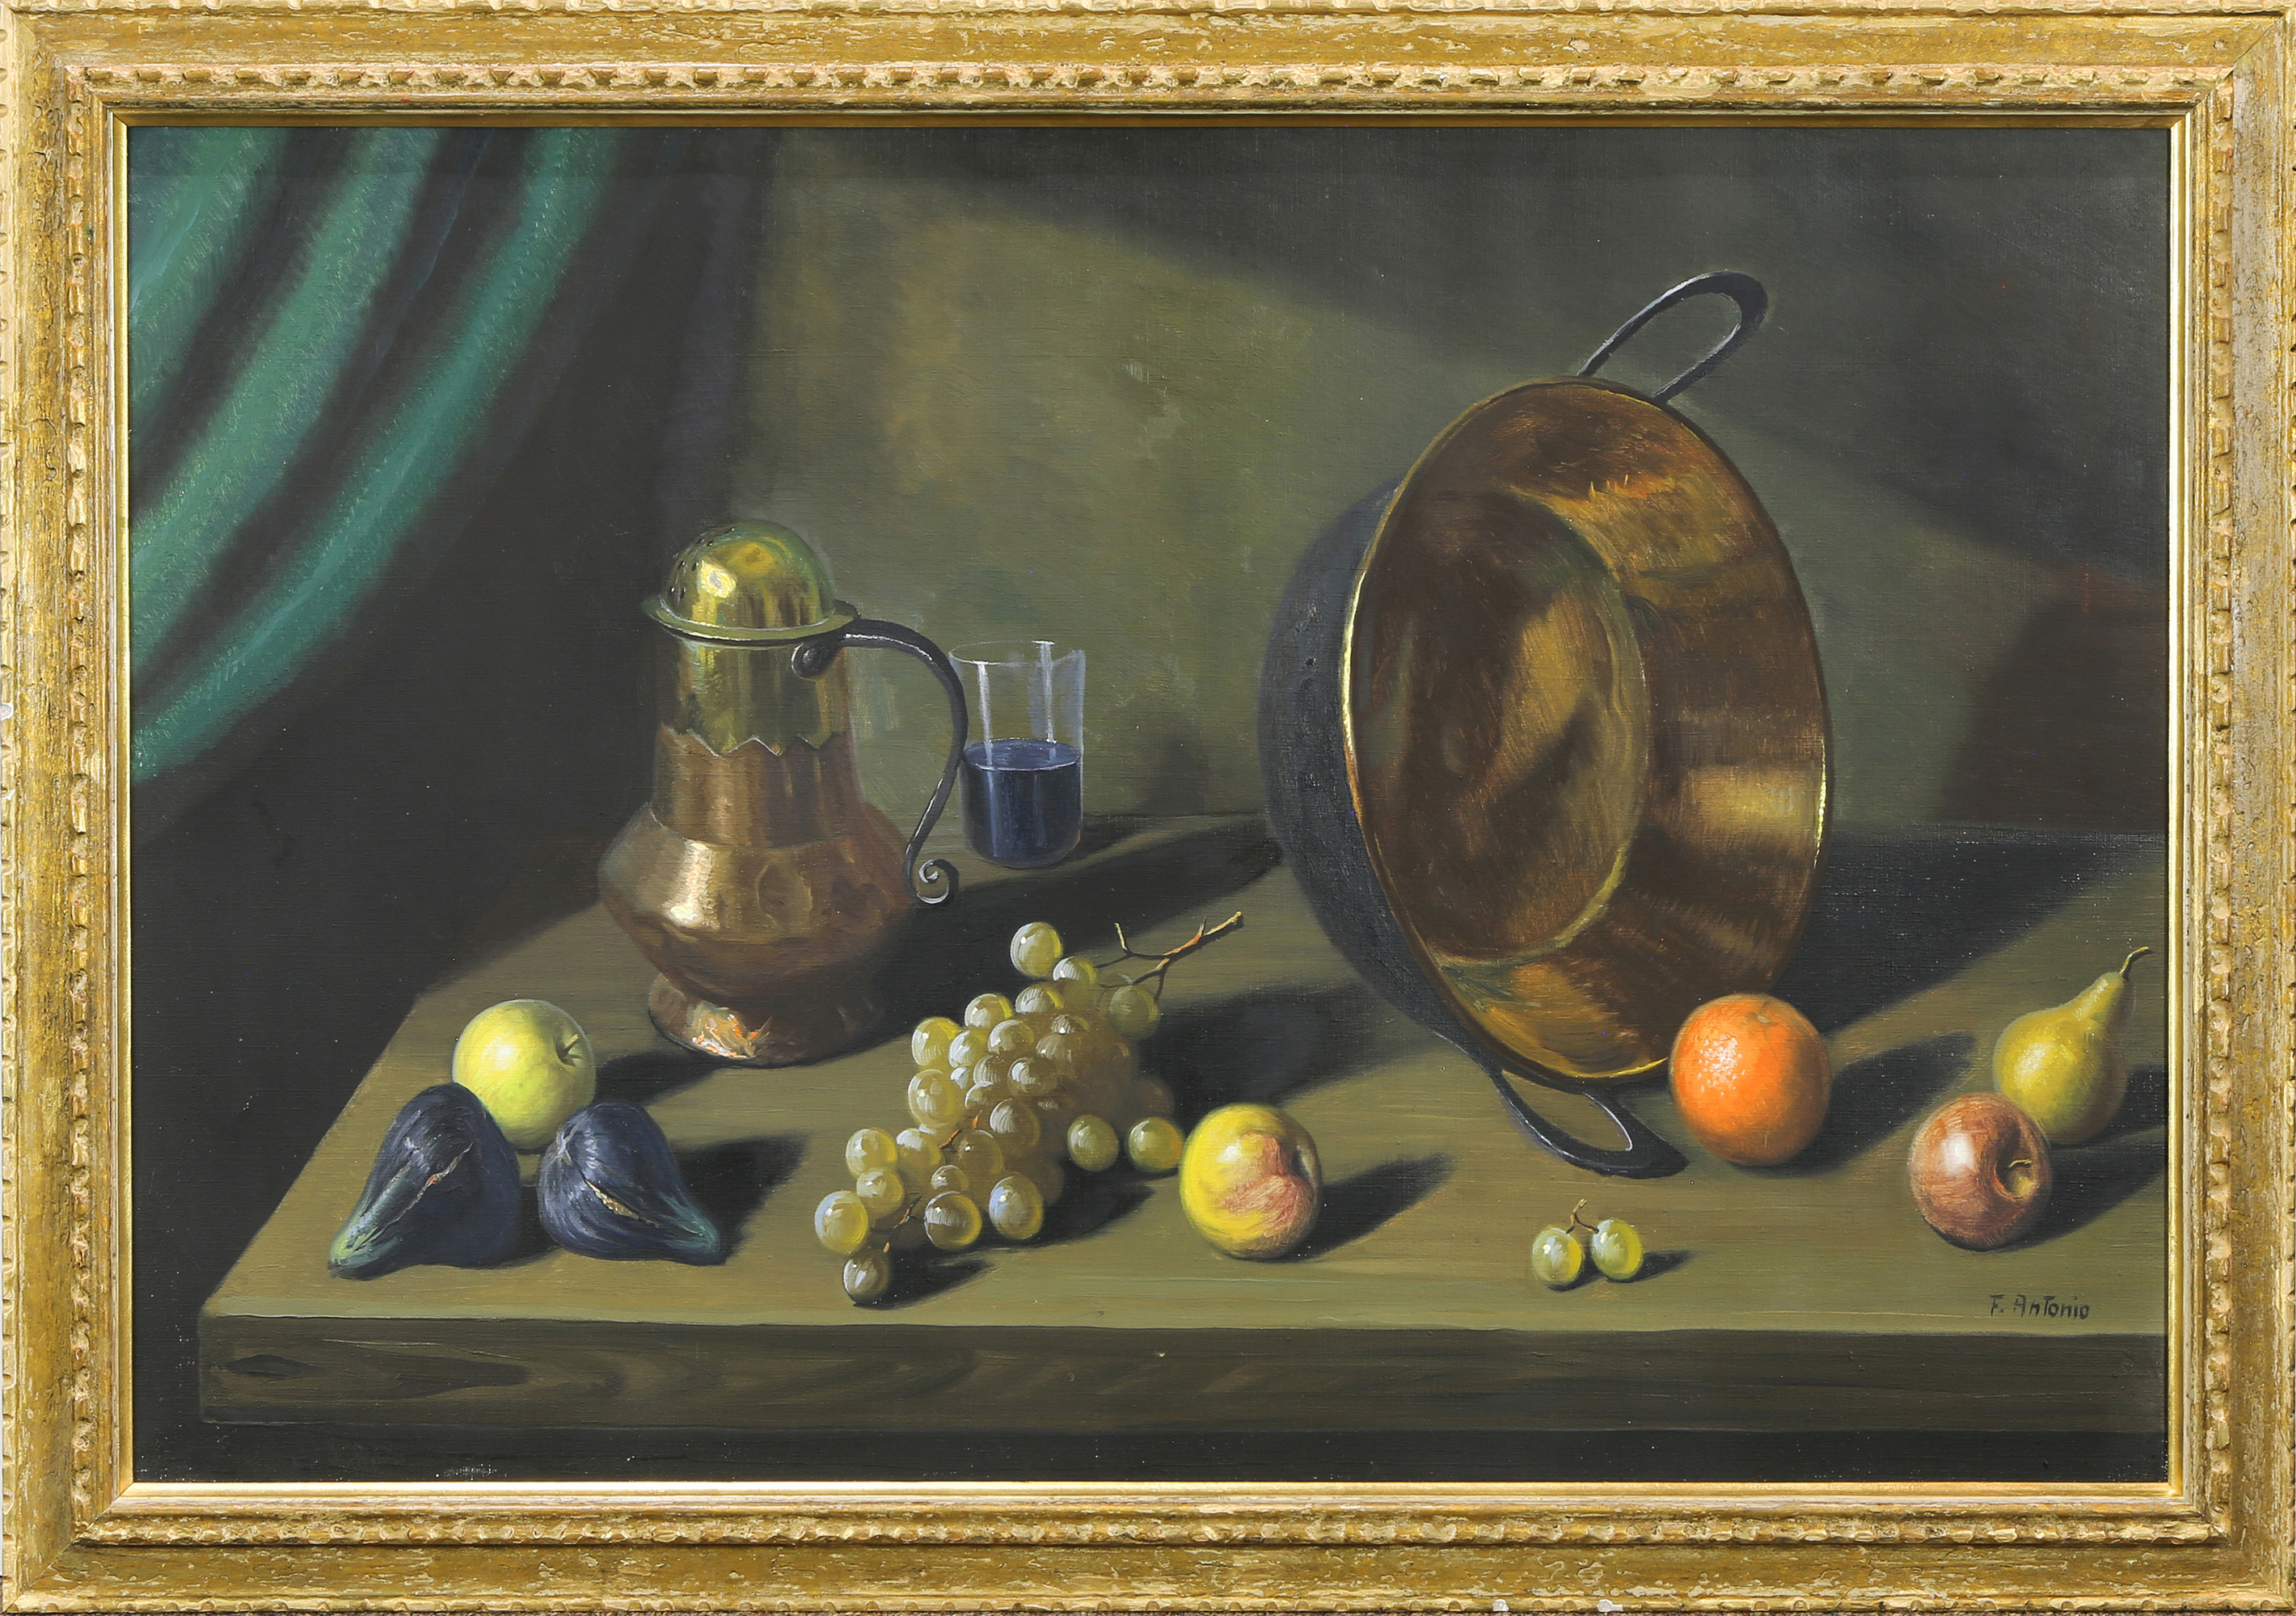 PAINTING STILL LIFE WITH COPPERWARE 3a35af